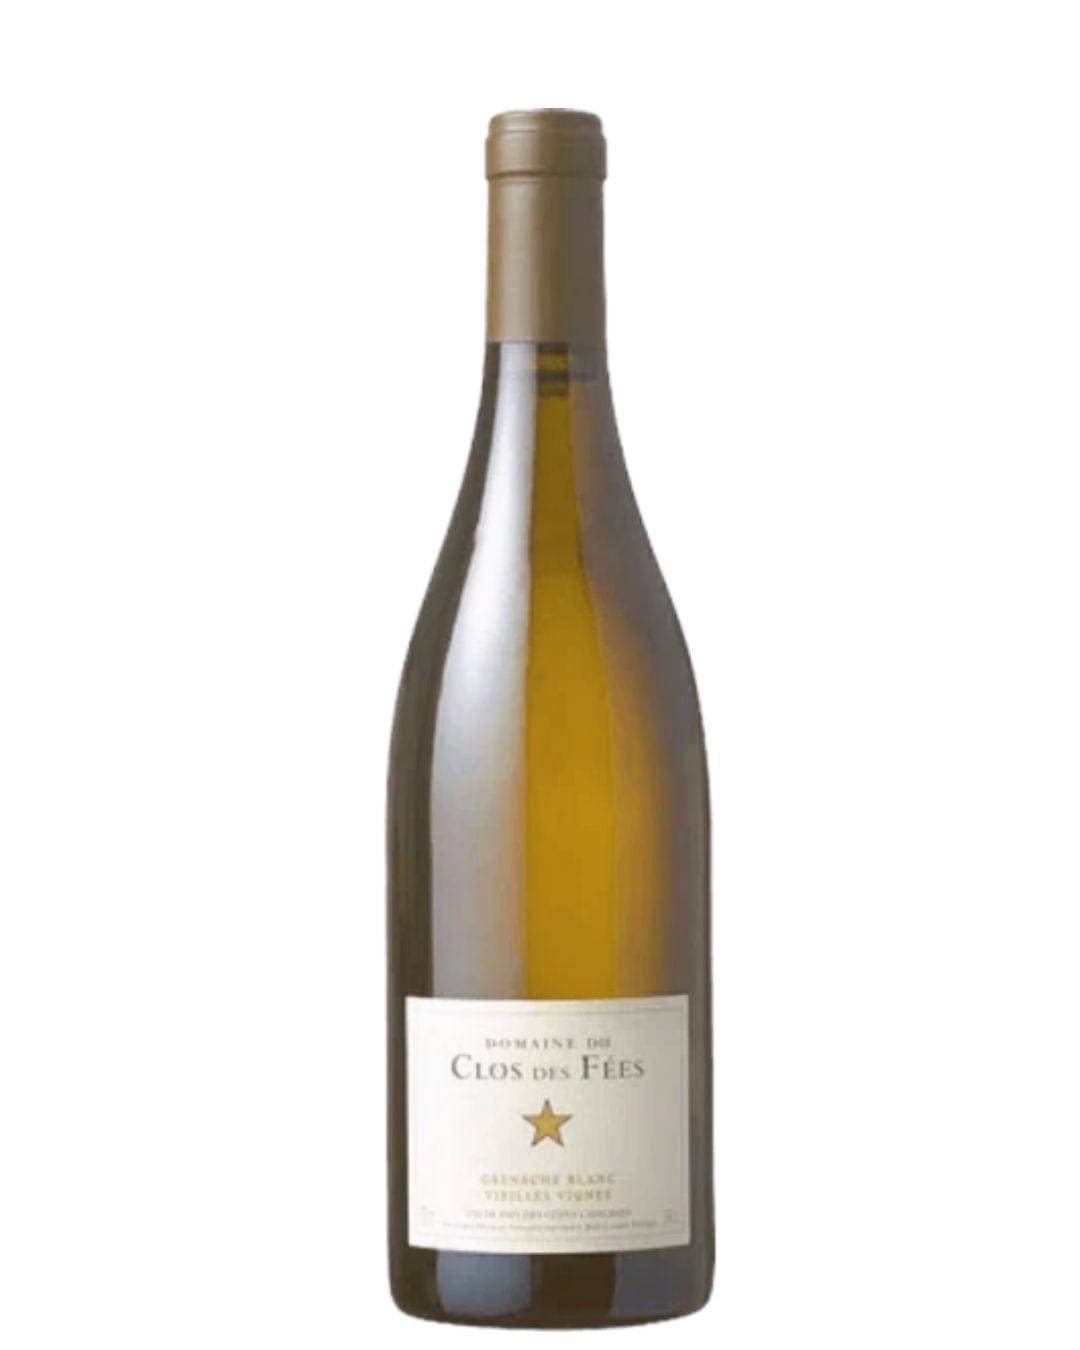 Shop Domaine du Clos des Fees Domaine du Clos des Fees Vieilles Vignes Blanc 2019 online at PENTICTON artisanal French wine store in Hong Kong. Discover other French wines, promotions, workshops and featured offers at pentictonpacific.com 